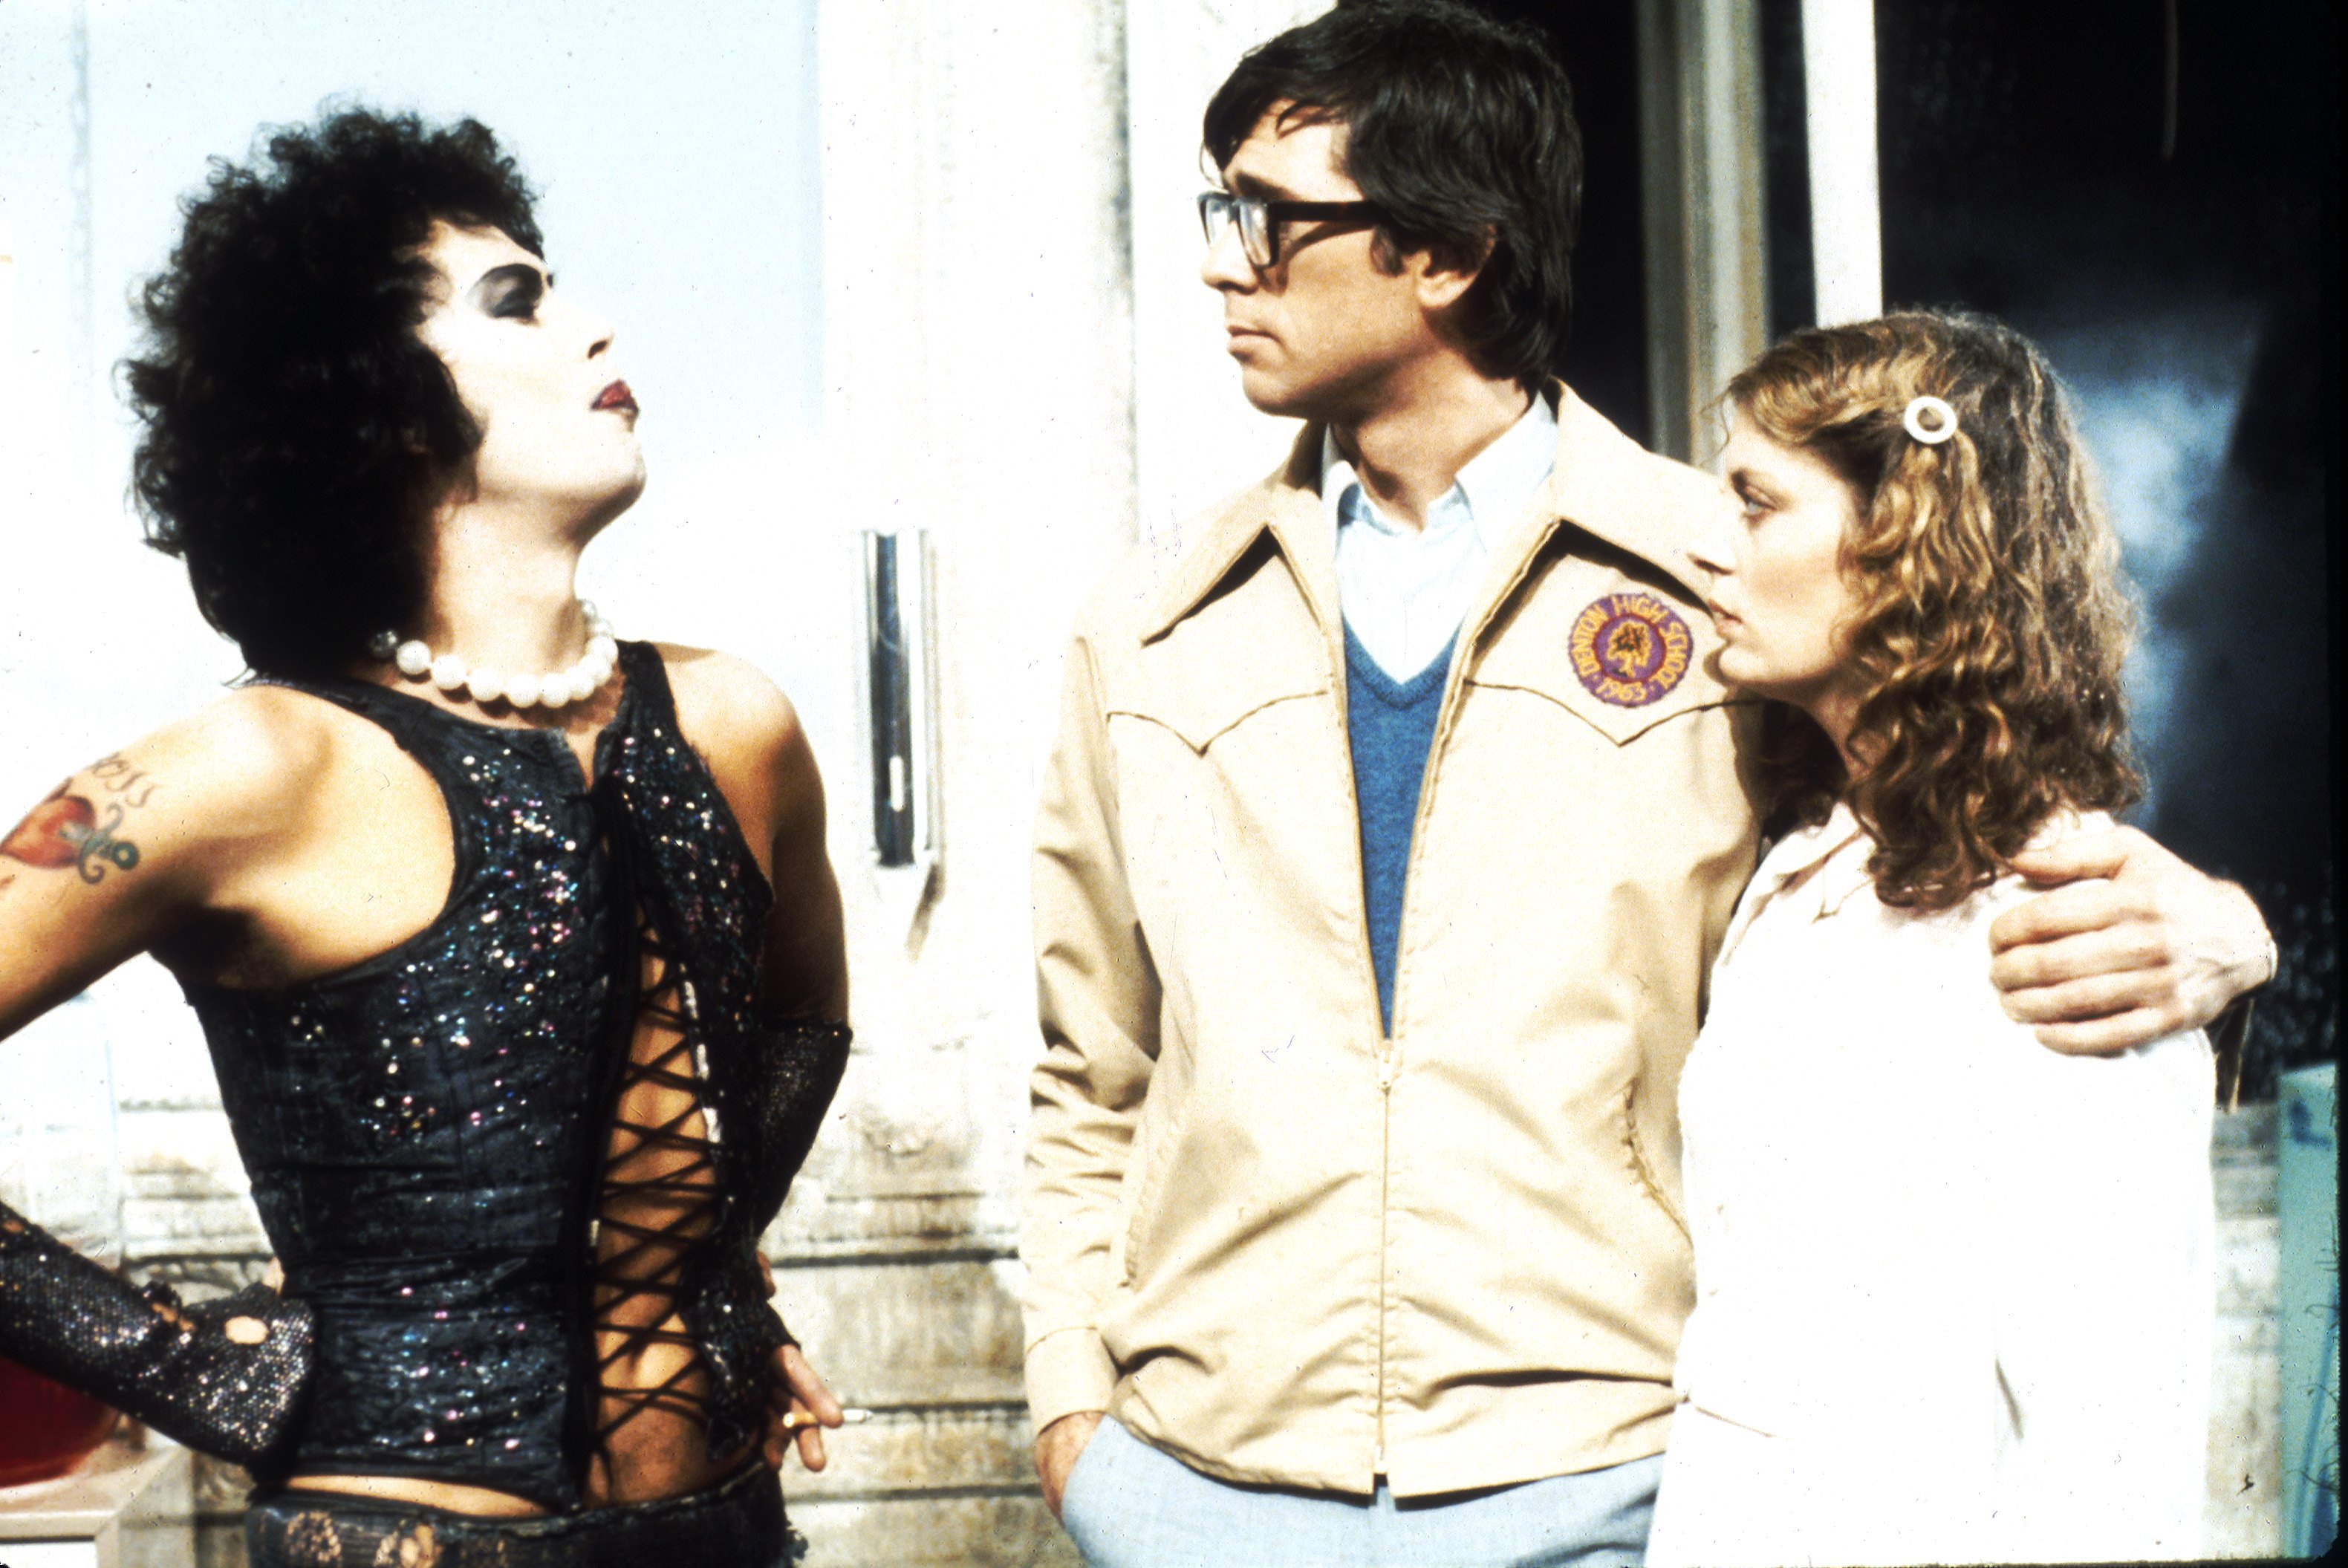 The Rocky Horror Show writer doubts it would be made today